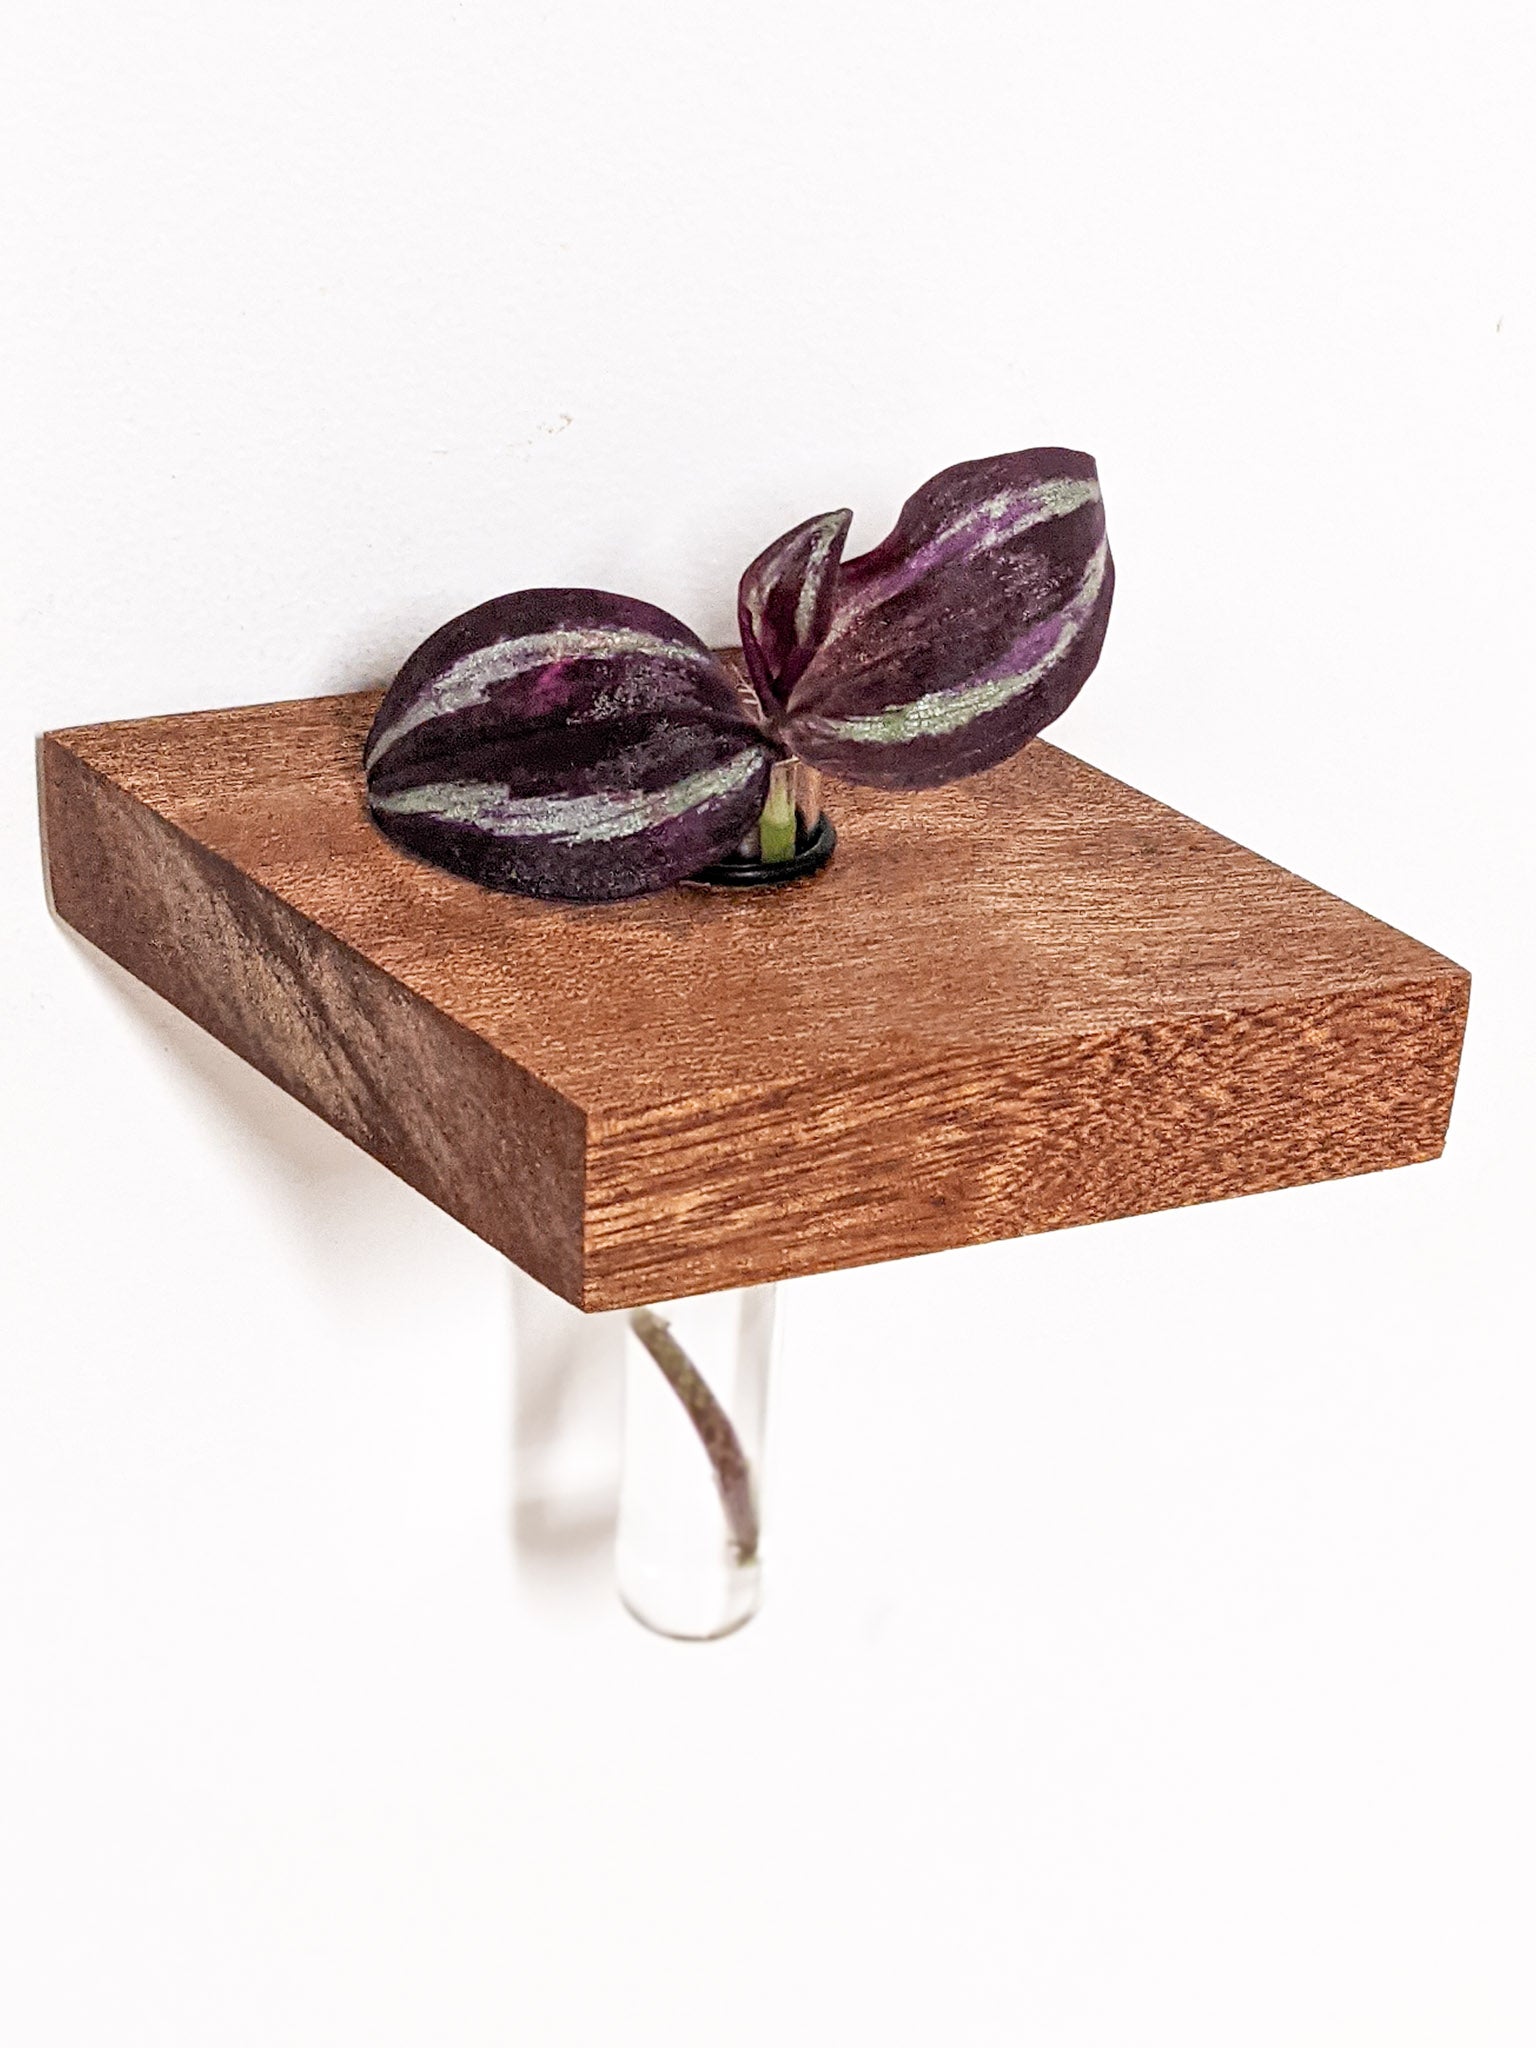 A single small mahogany propagation shelf is wall-mounted. A test tube securely fits within the provided hole and a wandering jew cutting sits within the test tube. The plant has two beautiful purple and green variegated leaves.